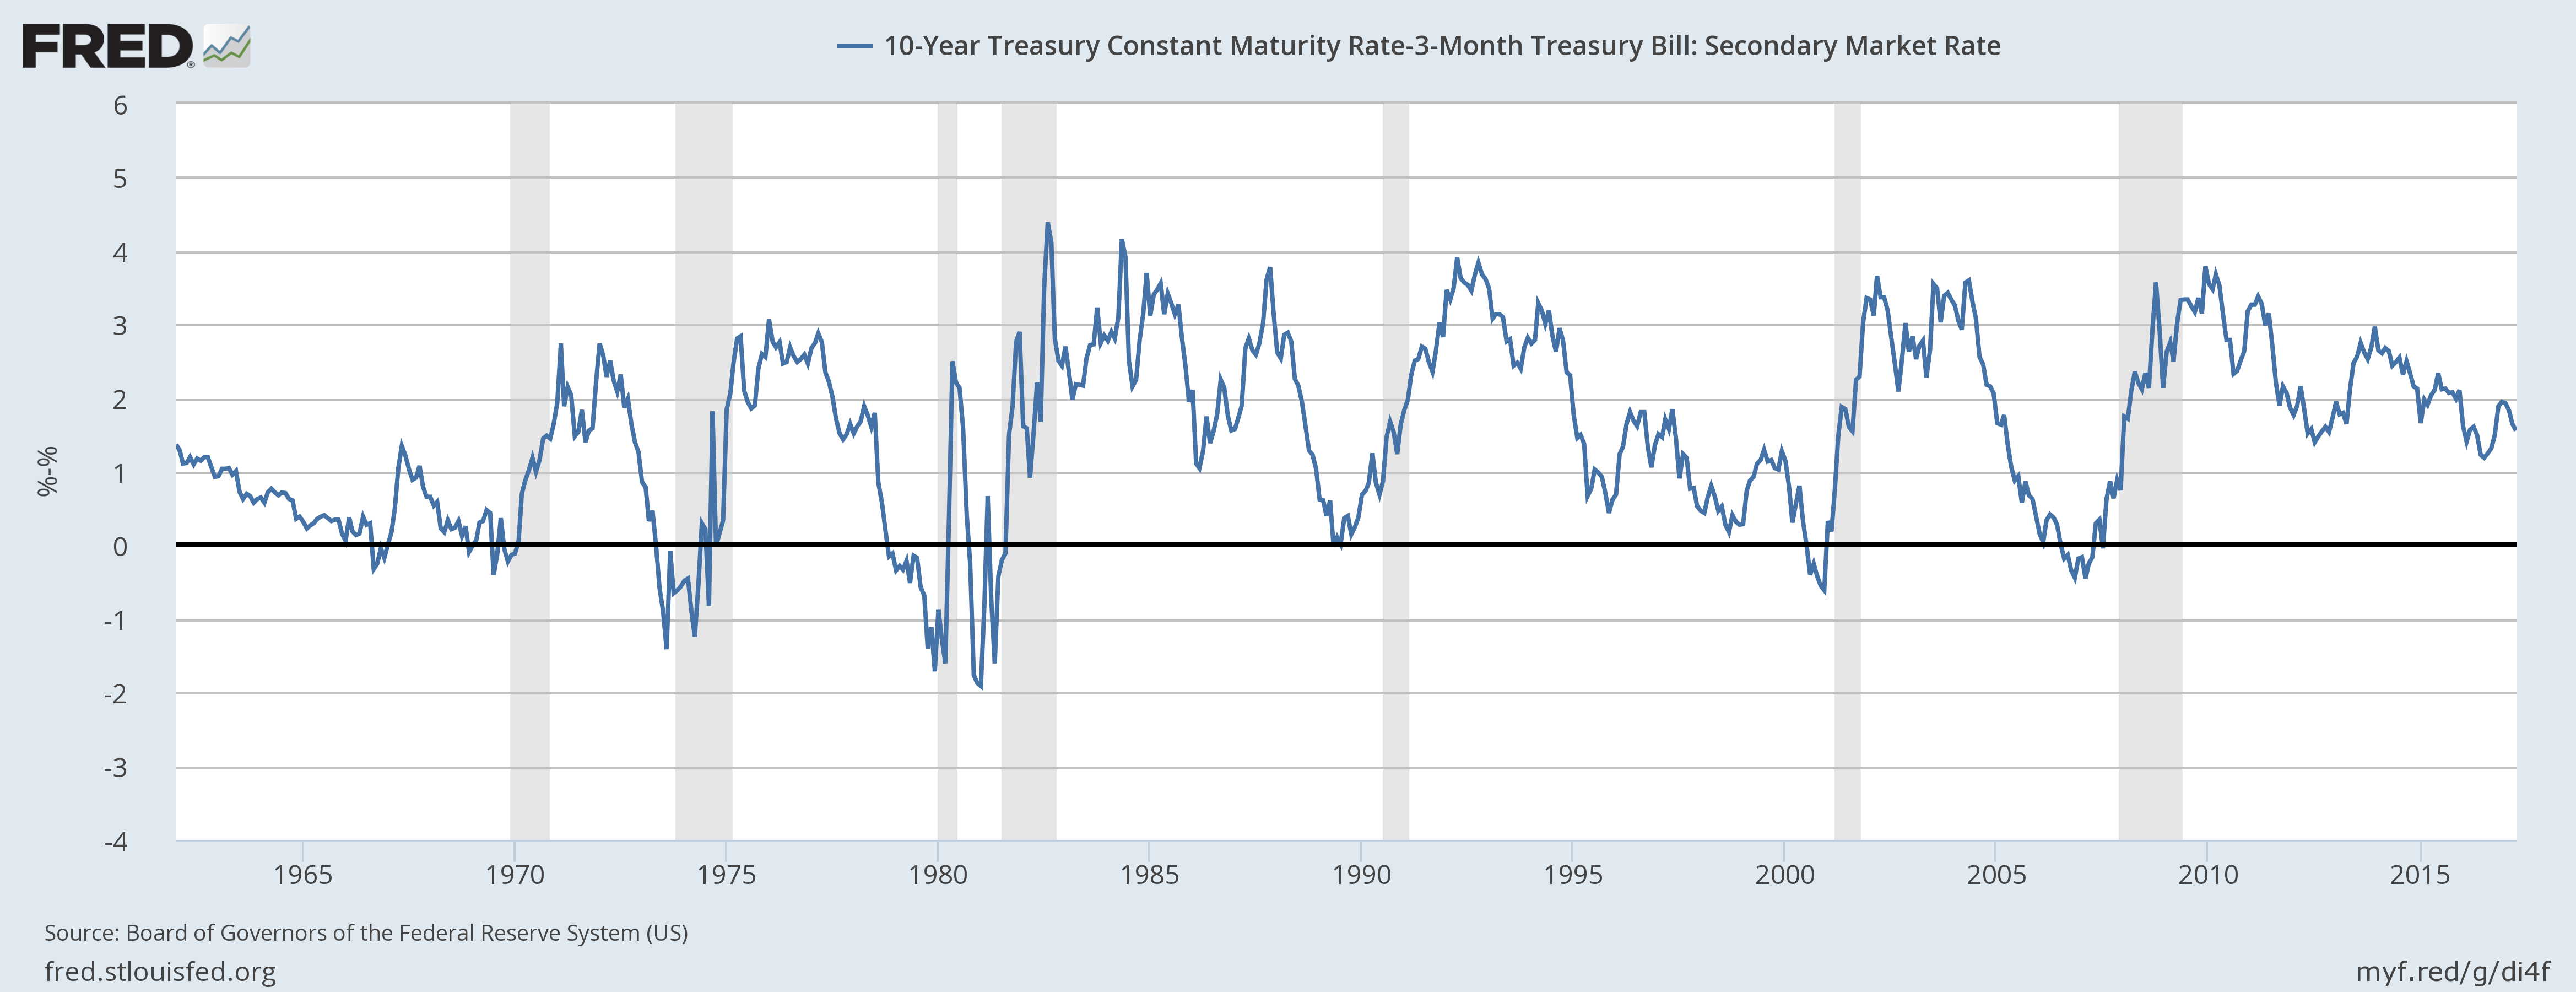 10-Year And 3-Month Interest-Rate Spread